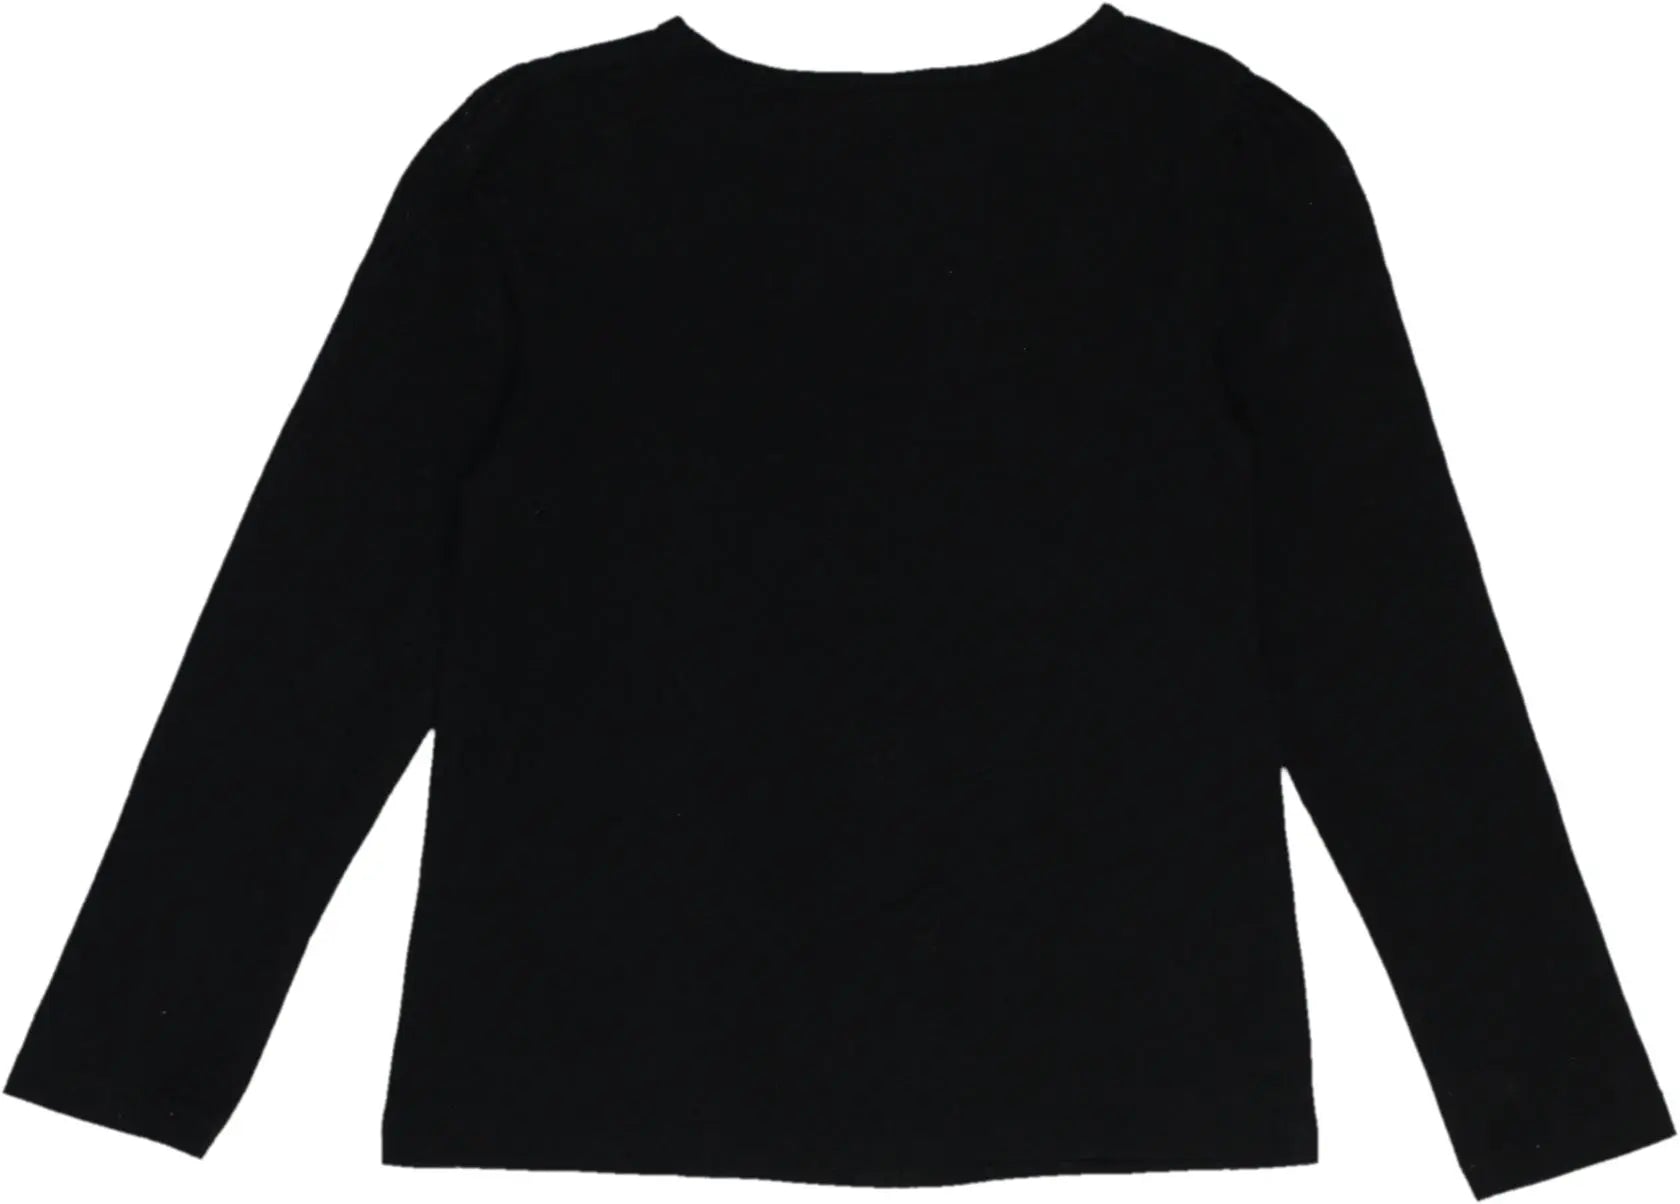 C&A - Black Long Sleeve Shirt- ThriftTale.com - Vintage and second handclothing